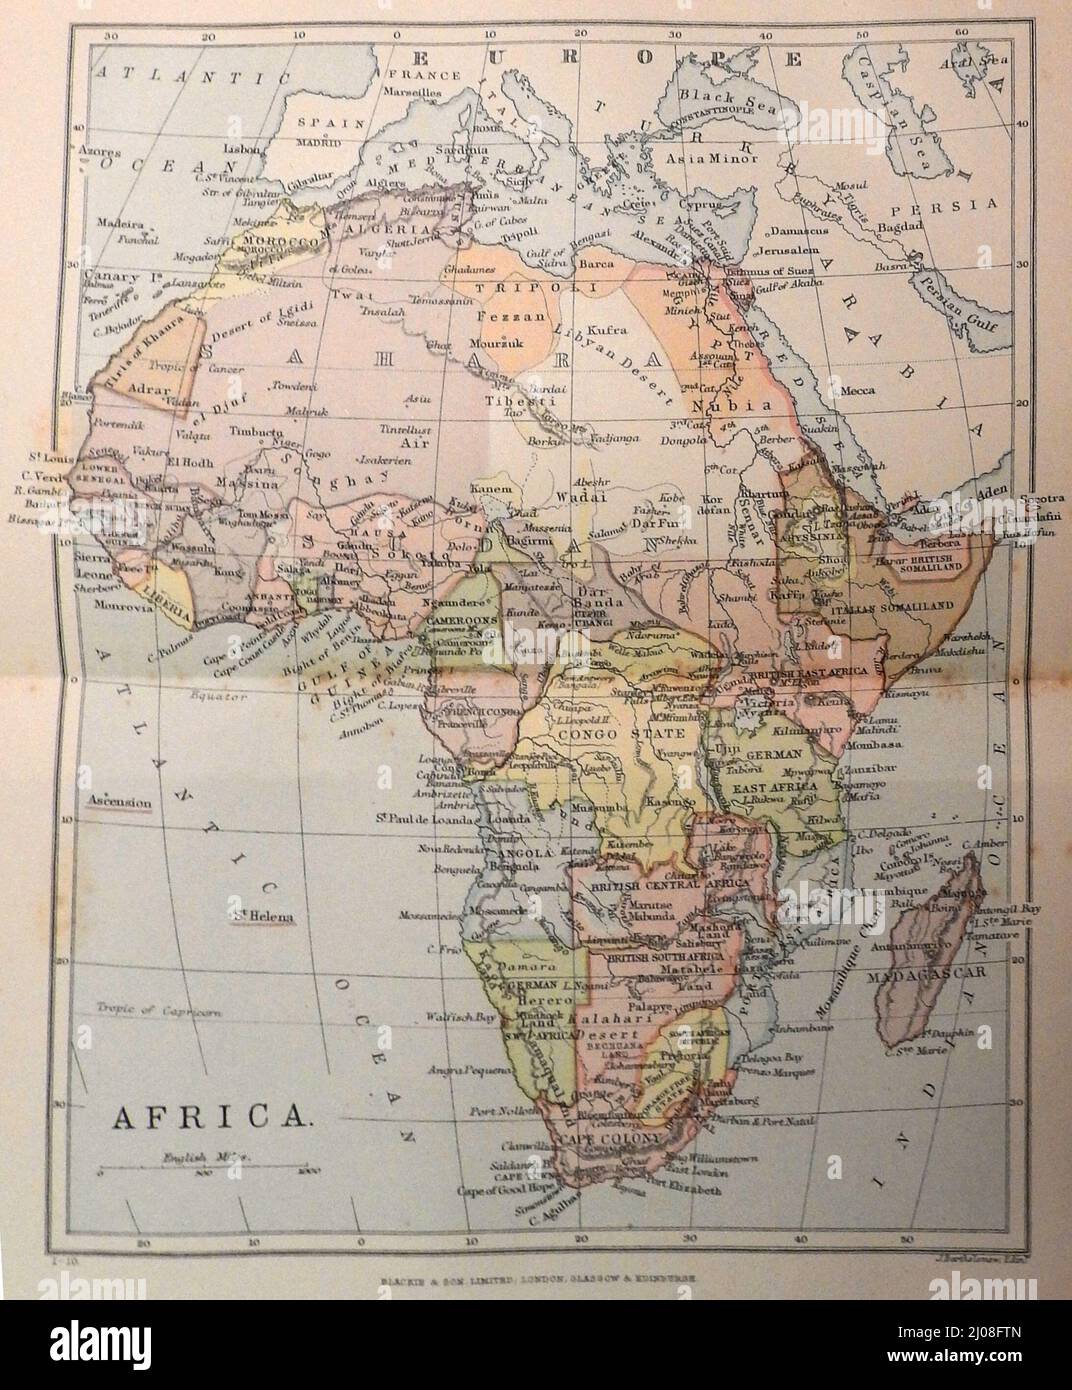 A late 19th century map of Africa showing lots of old former names and boundaries / borders. Stock Photo